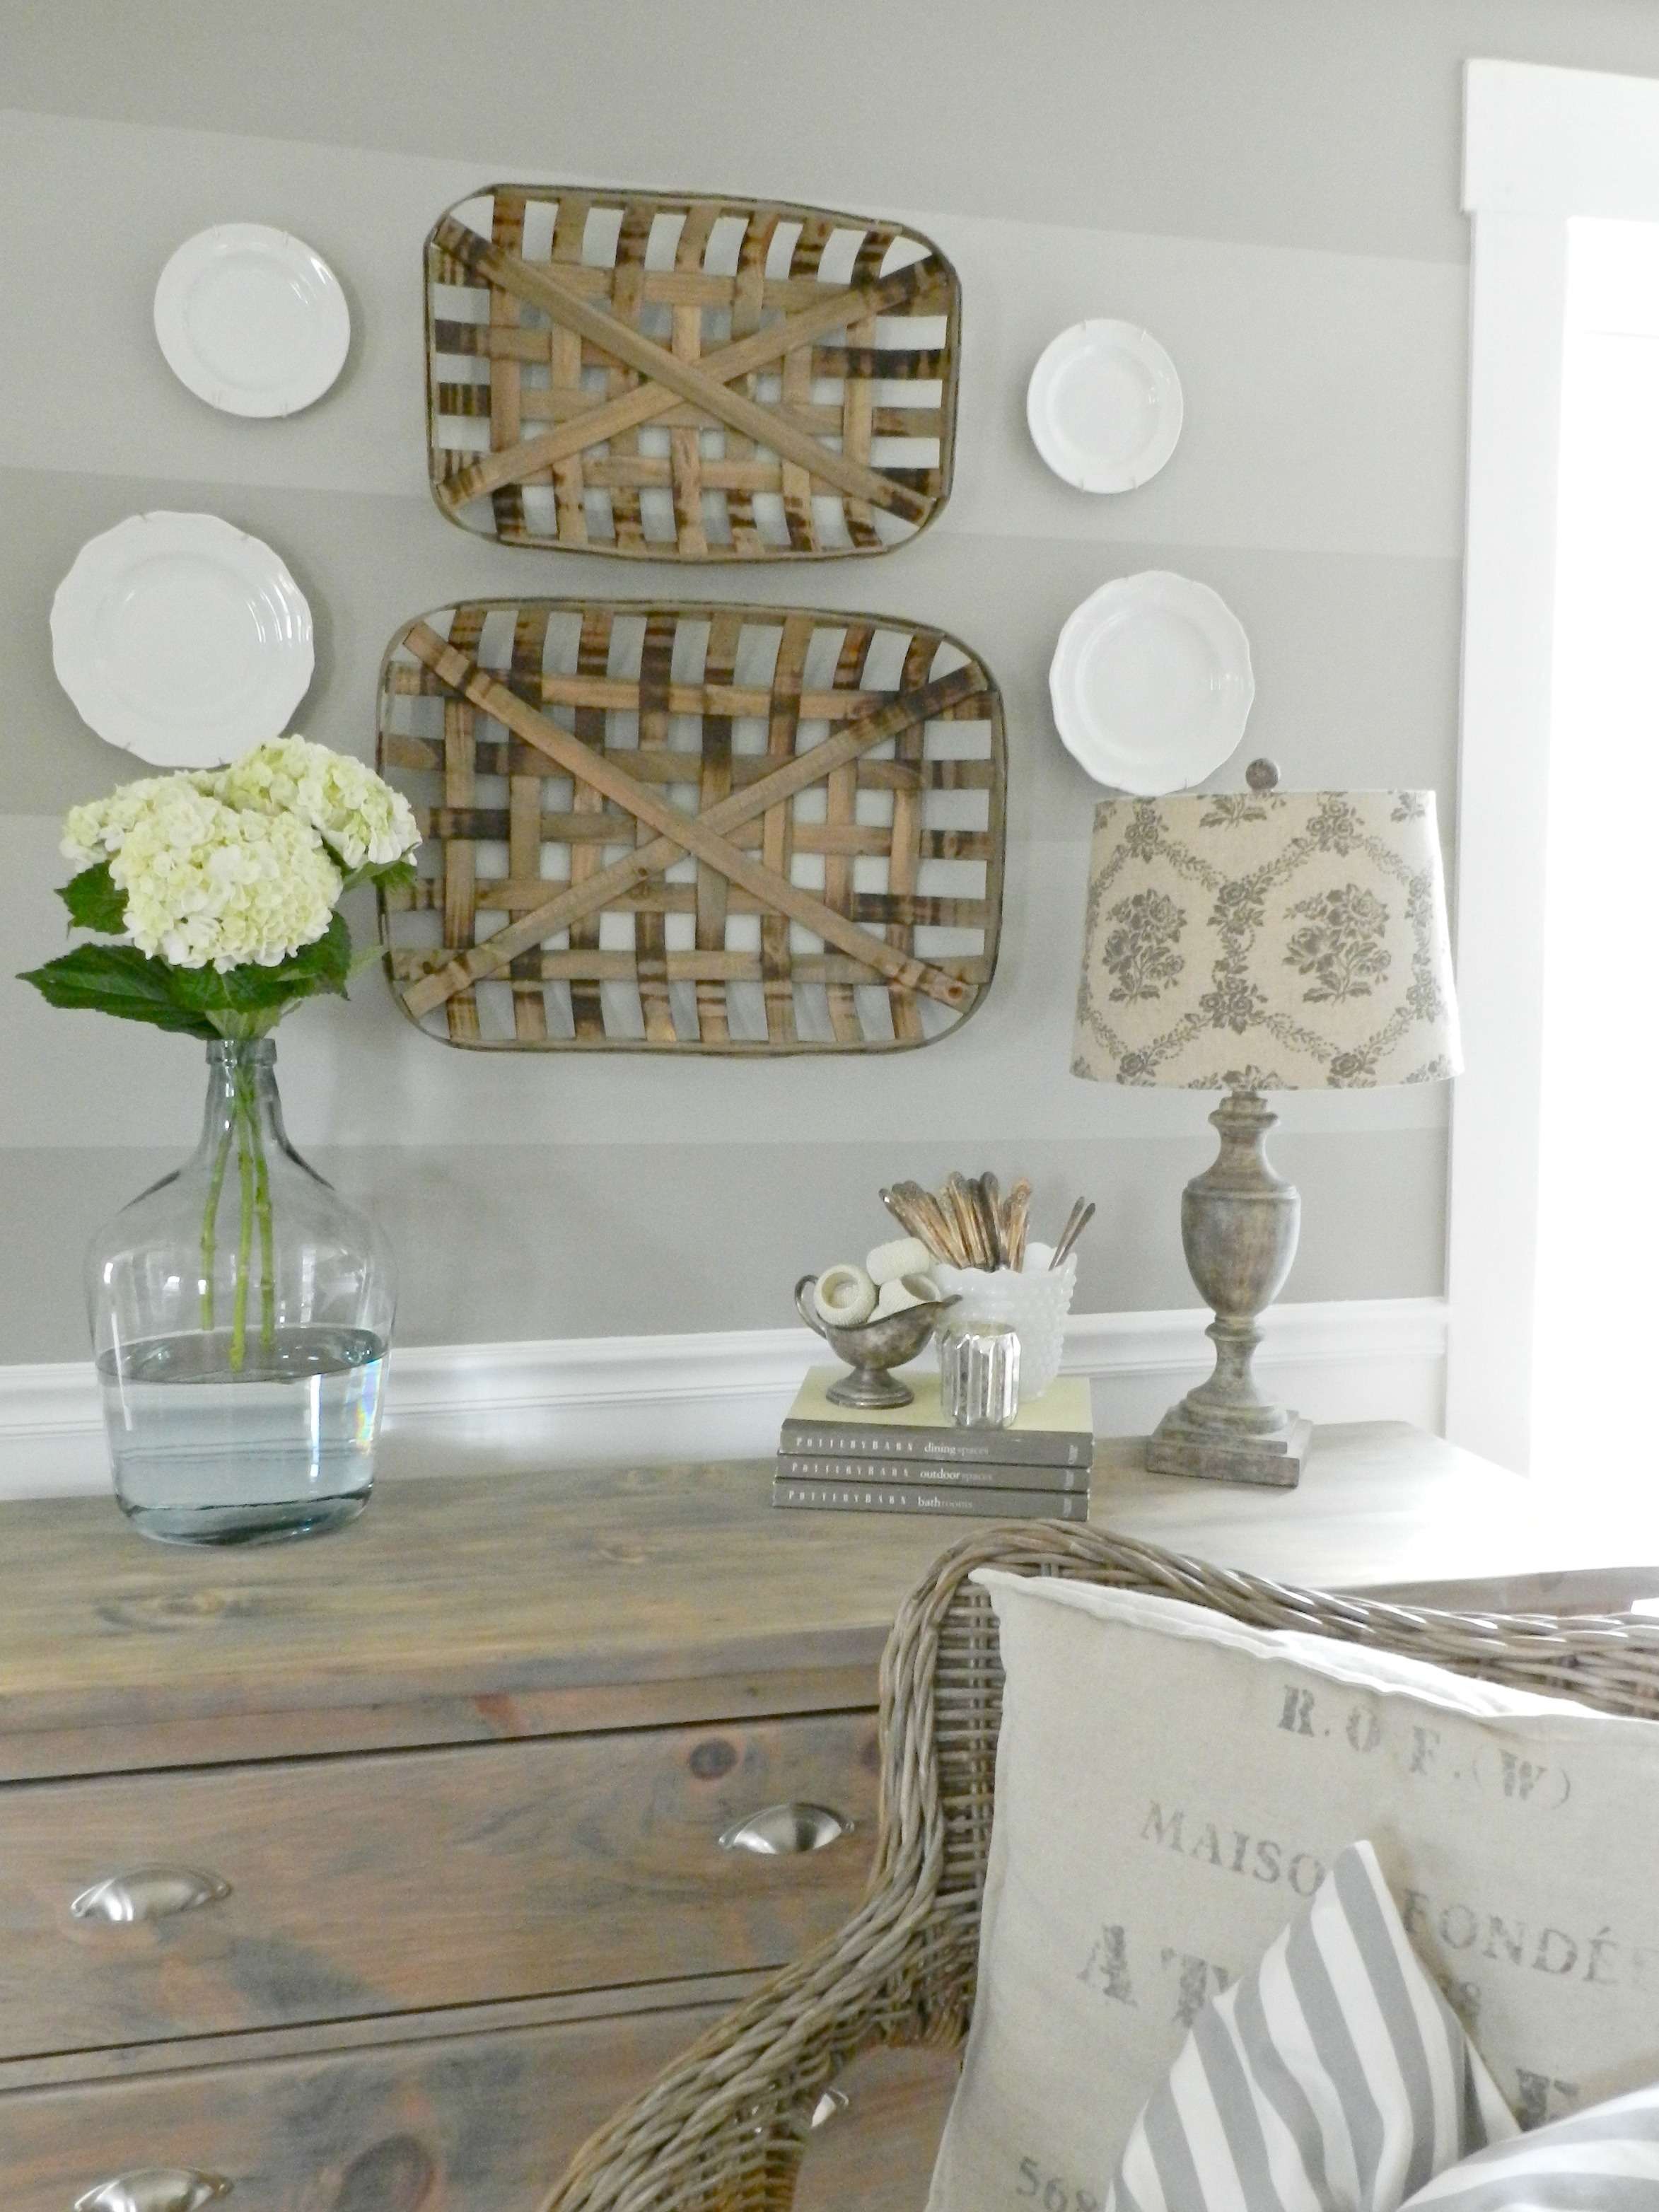 Tobacco Baskets wall decor & a Giveaway!